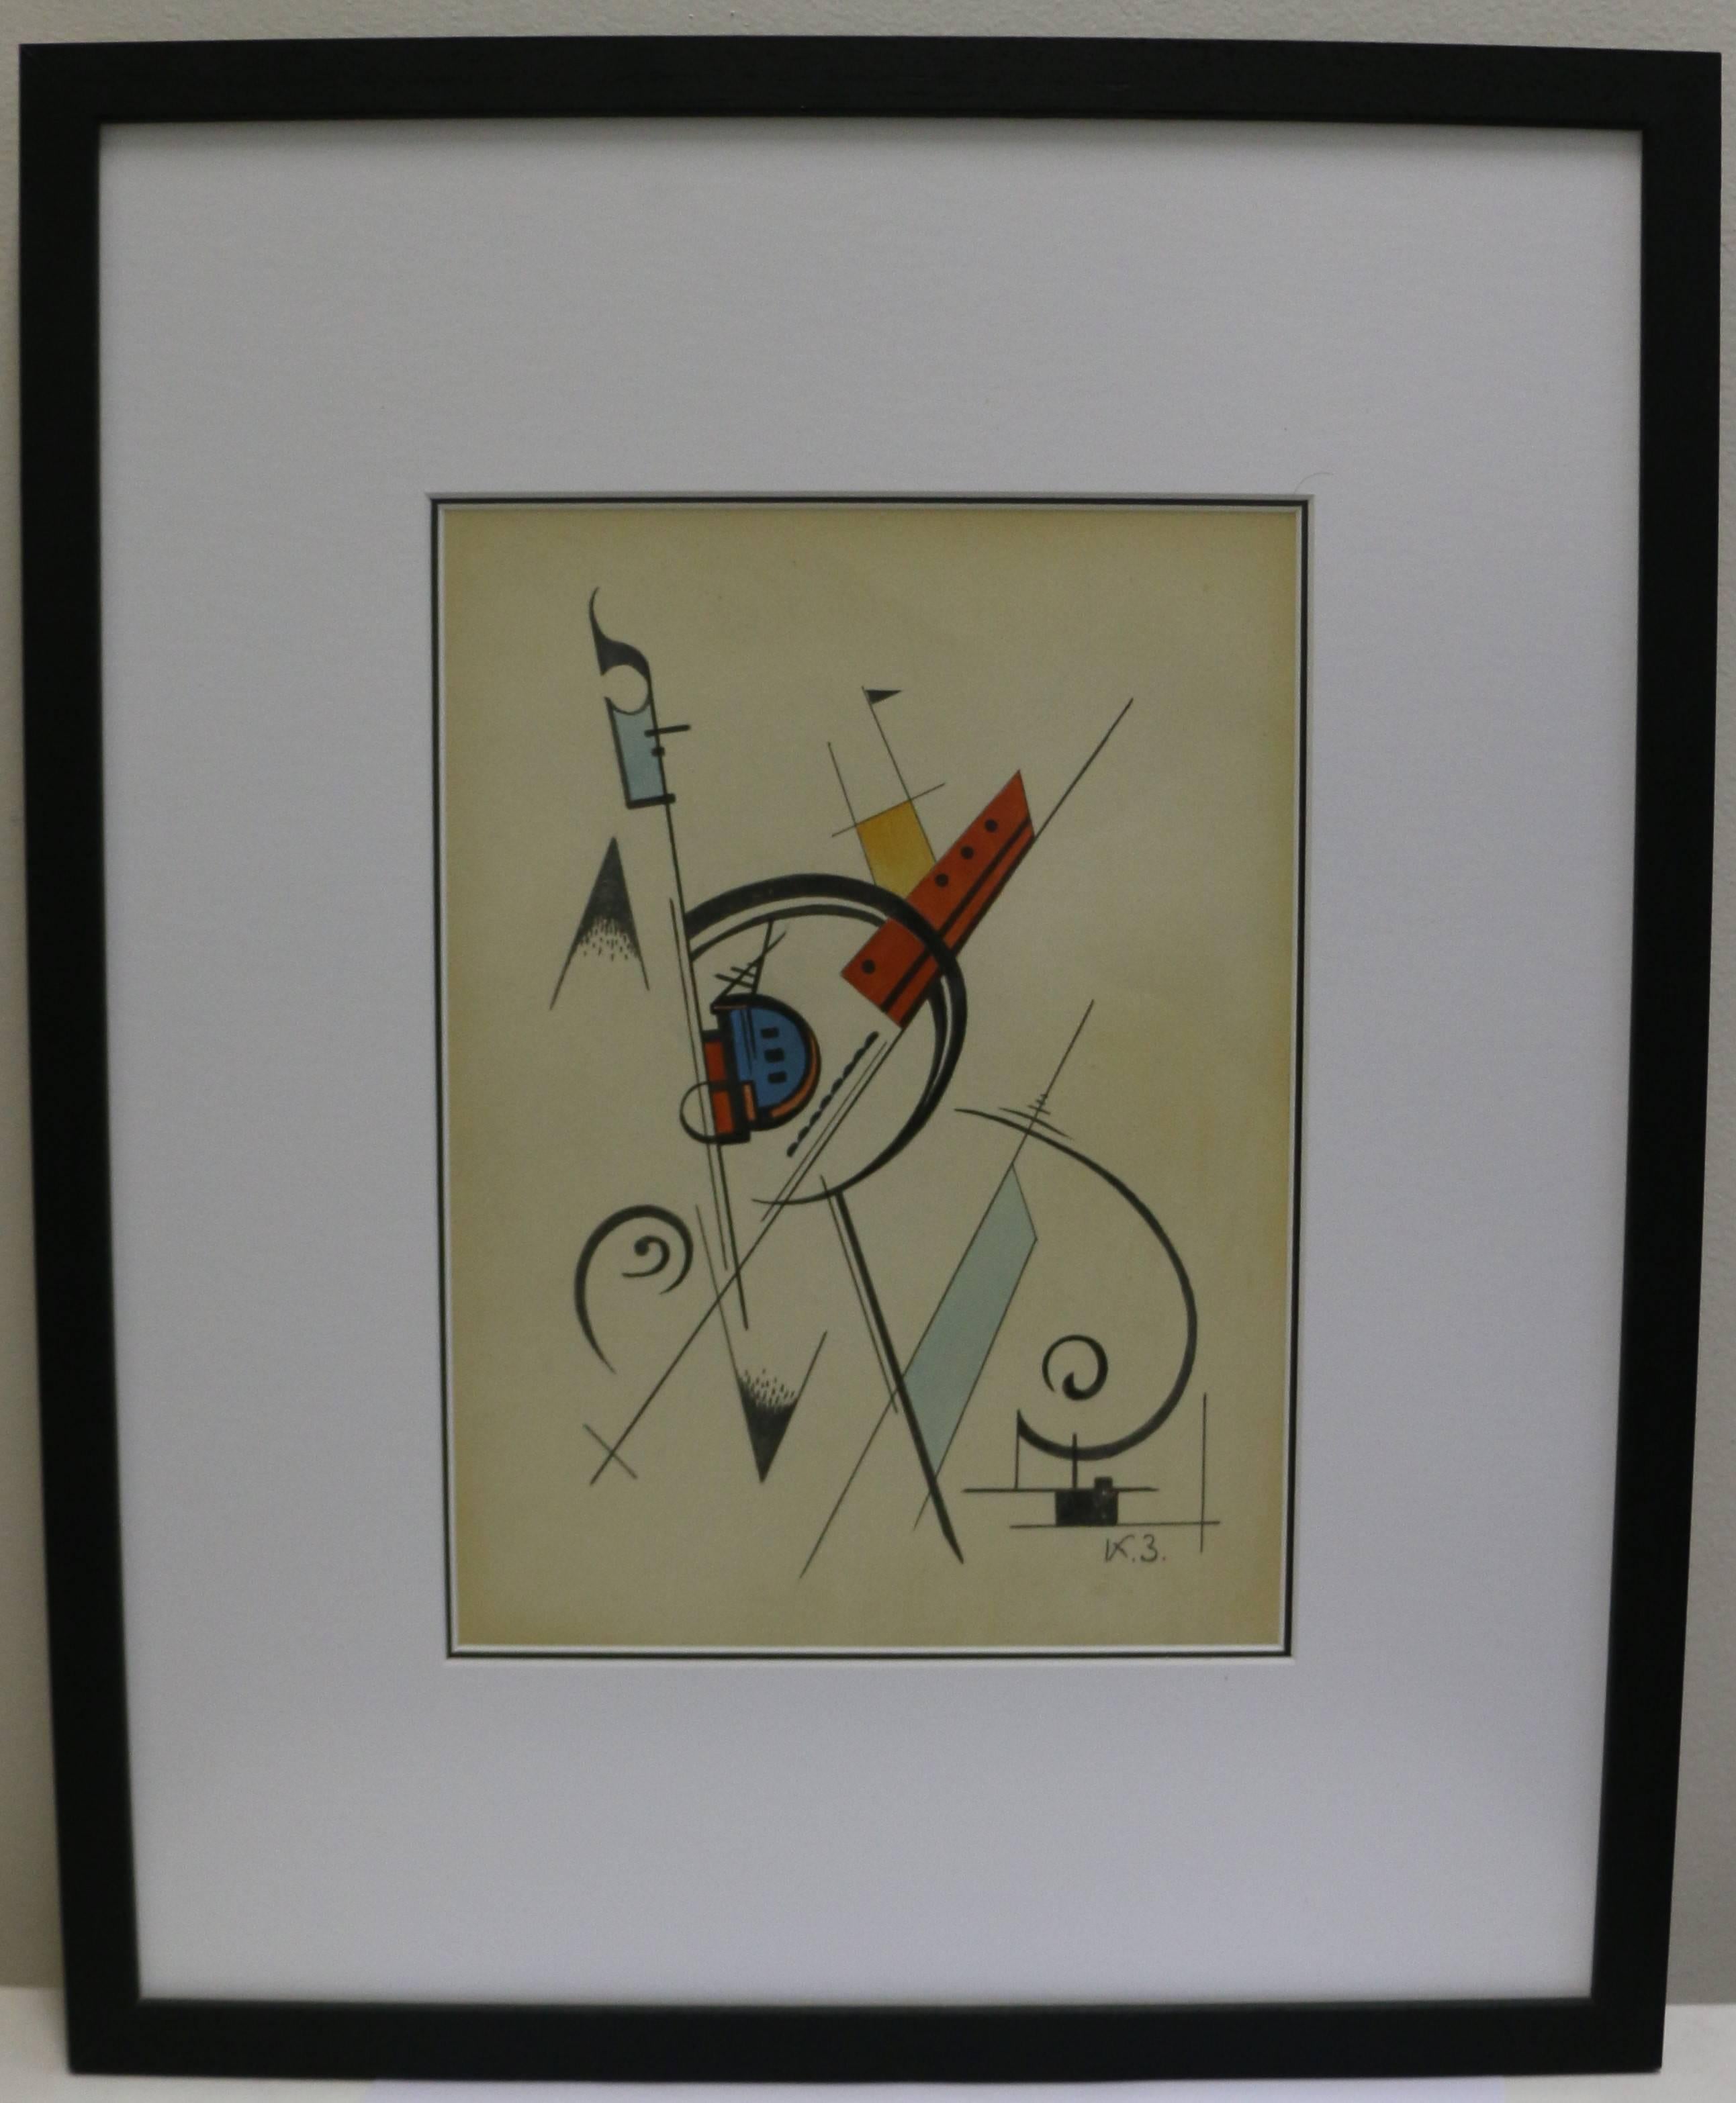 Abstract composition by Kirill Mikhaïlovitch Zdanévitch (1892-1969). Watercolor on paper, signed bottom right, 1920s-1930s. 
KM Zdanéwitch was a prominent Russian abstract painter. His style is often associated with Kandinsky.

Dimensions: